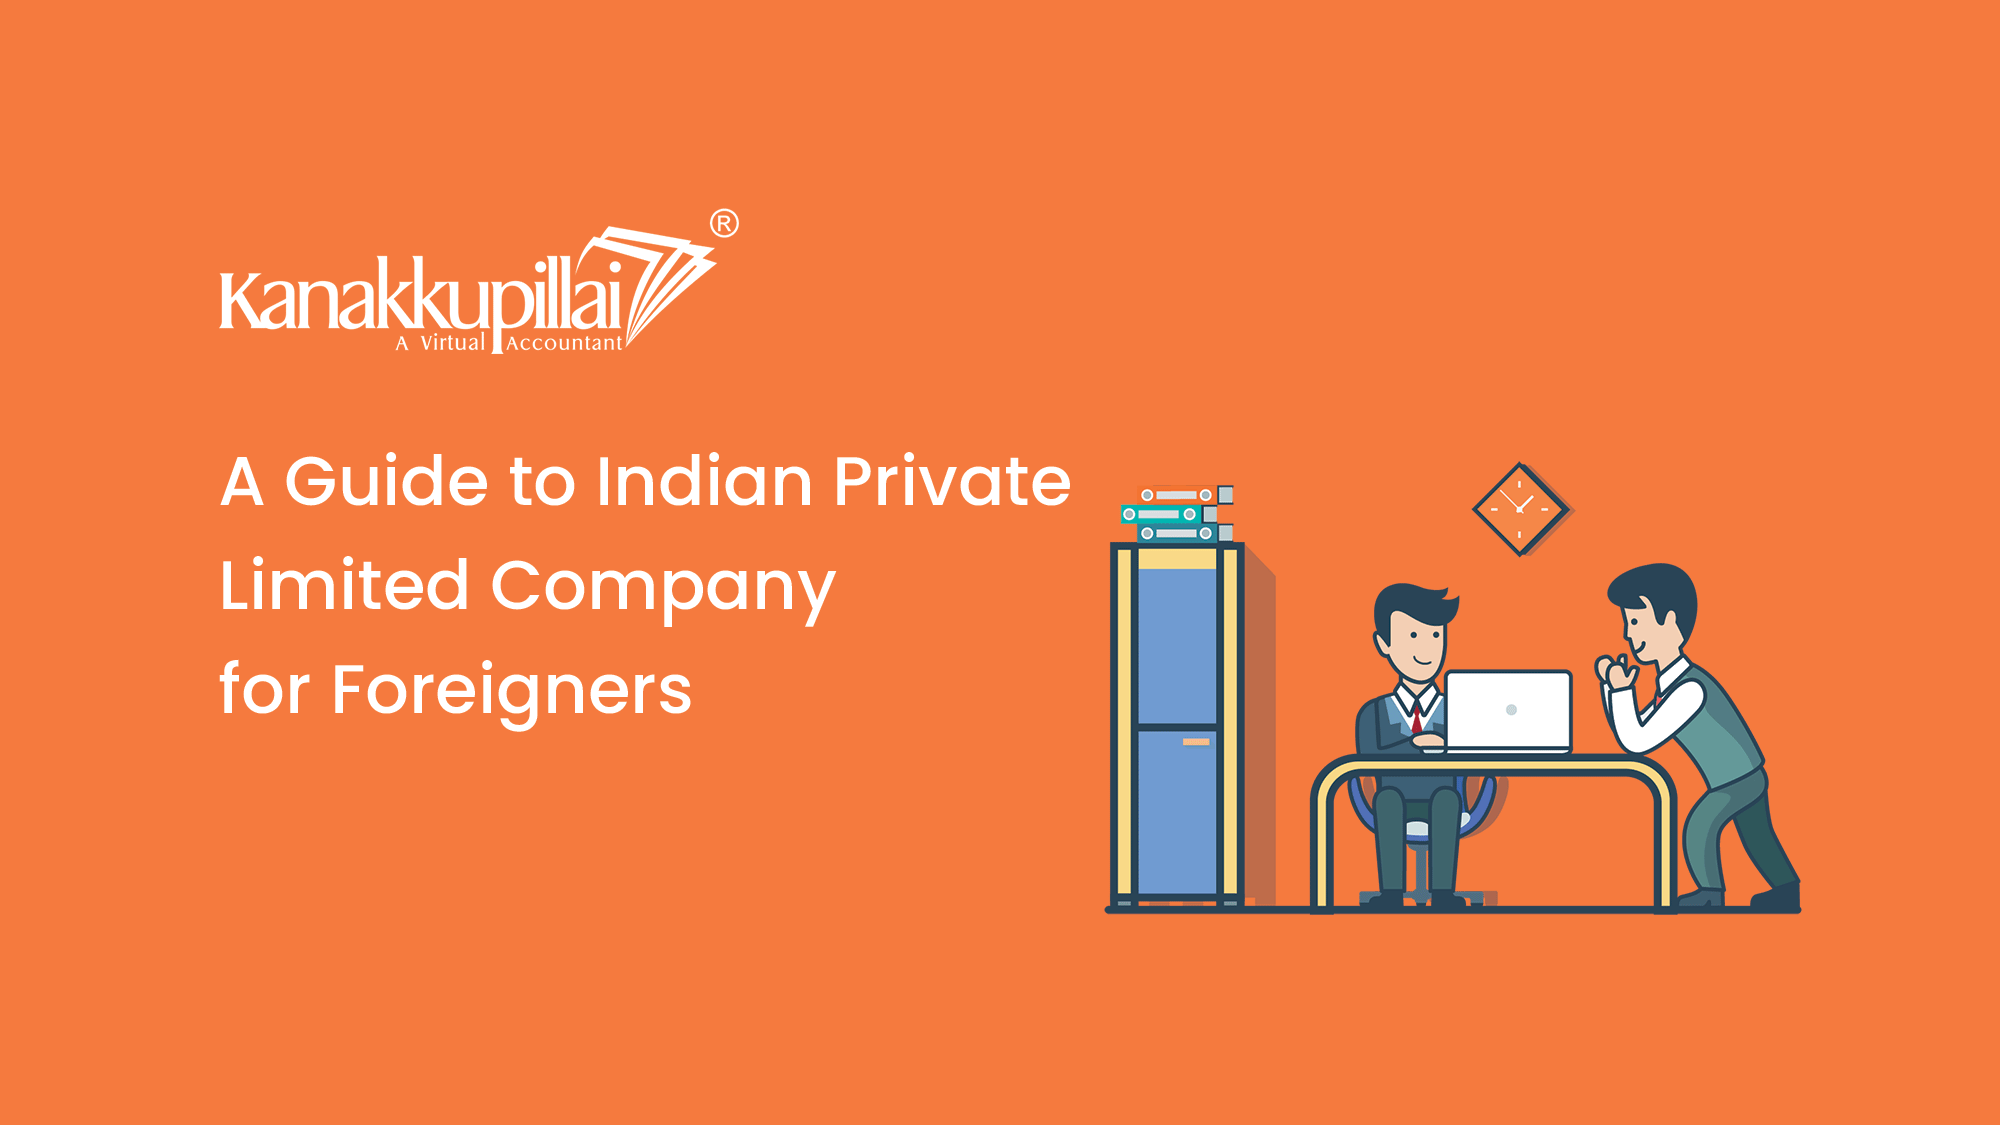 A Guide to Indian Private Limited Company for Foreigners